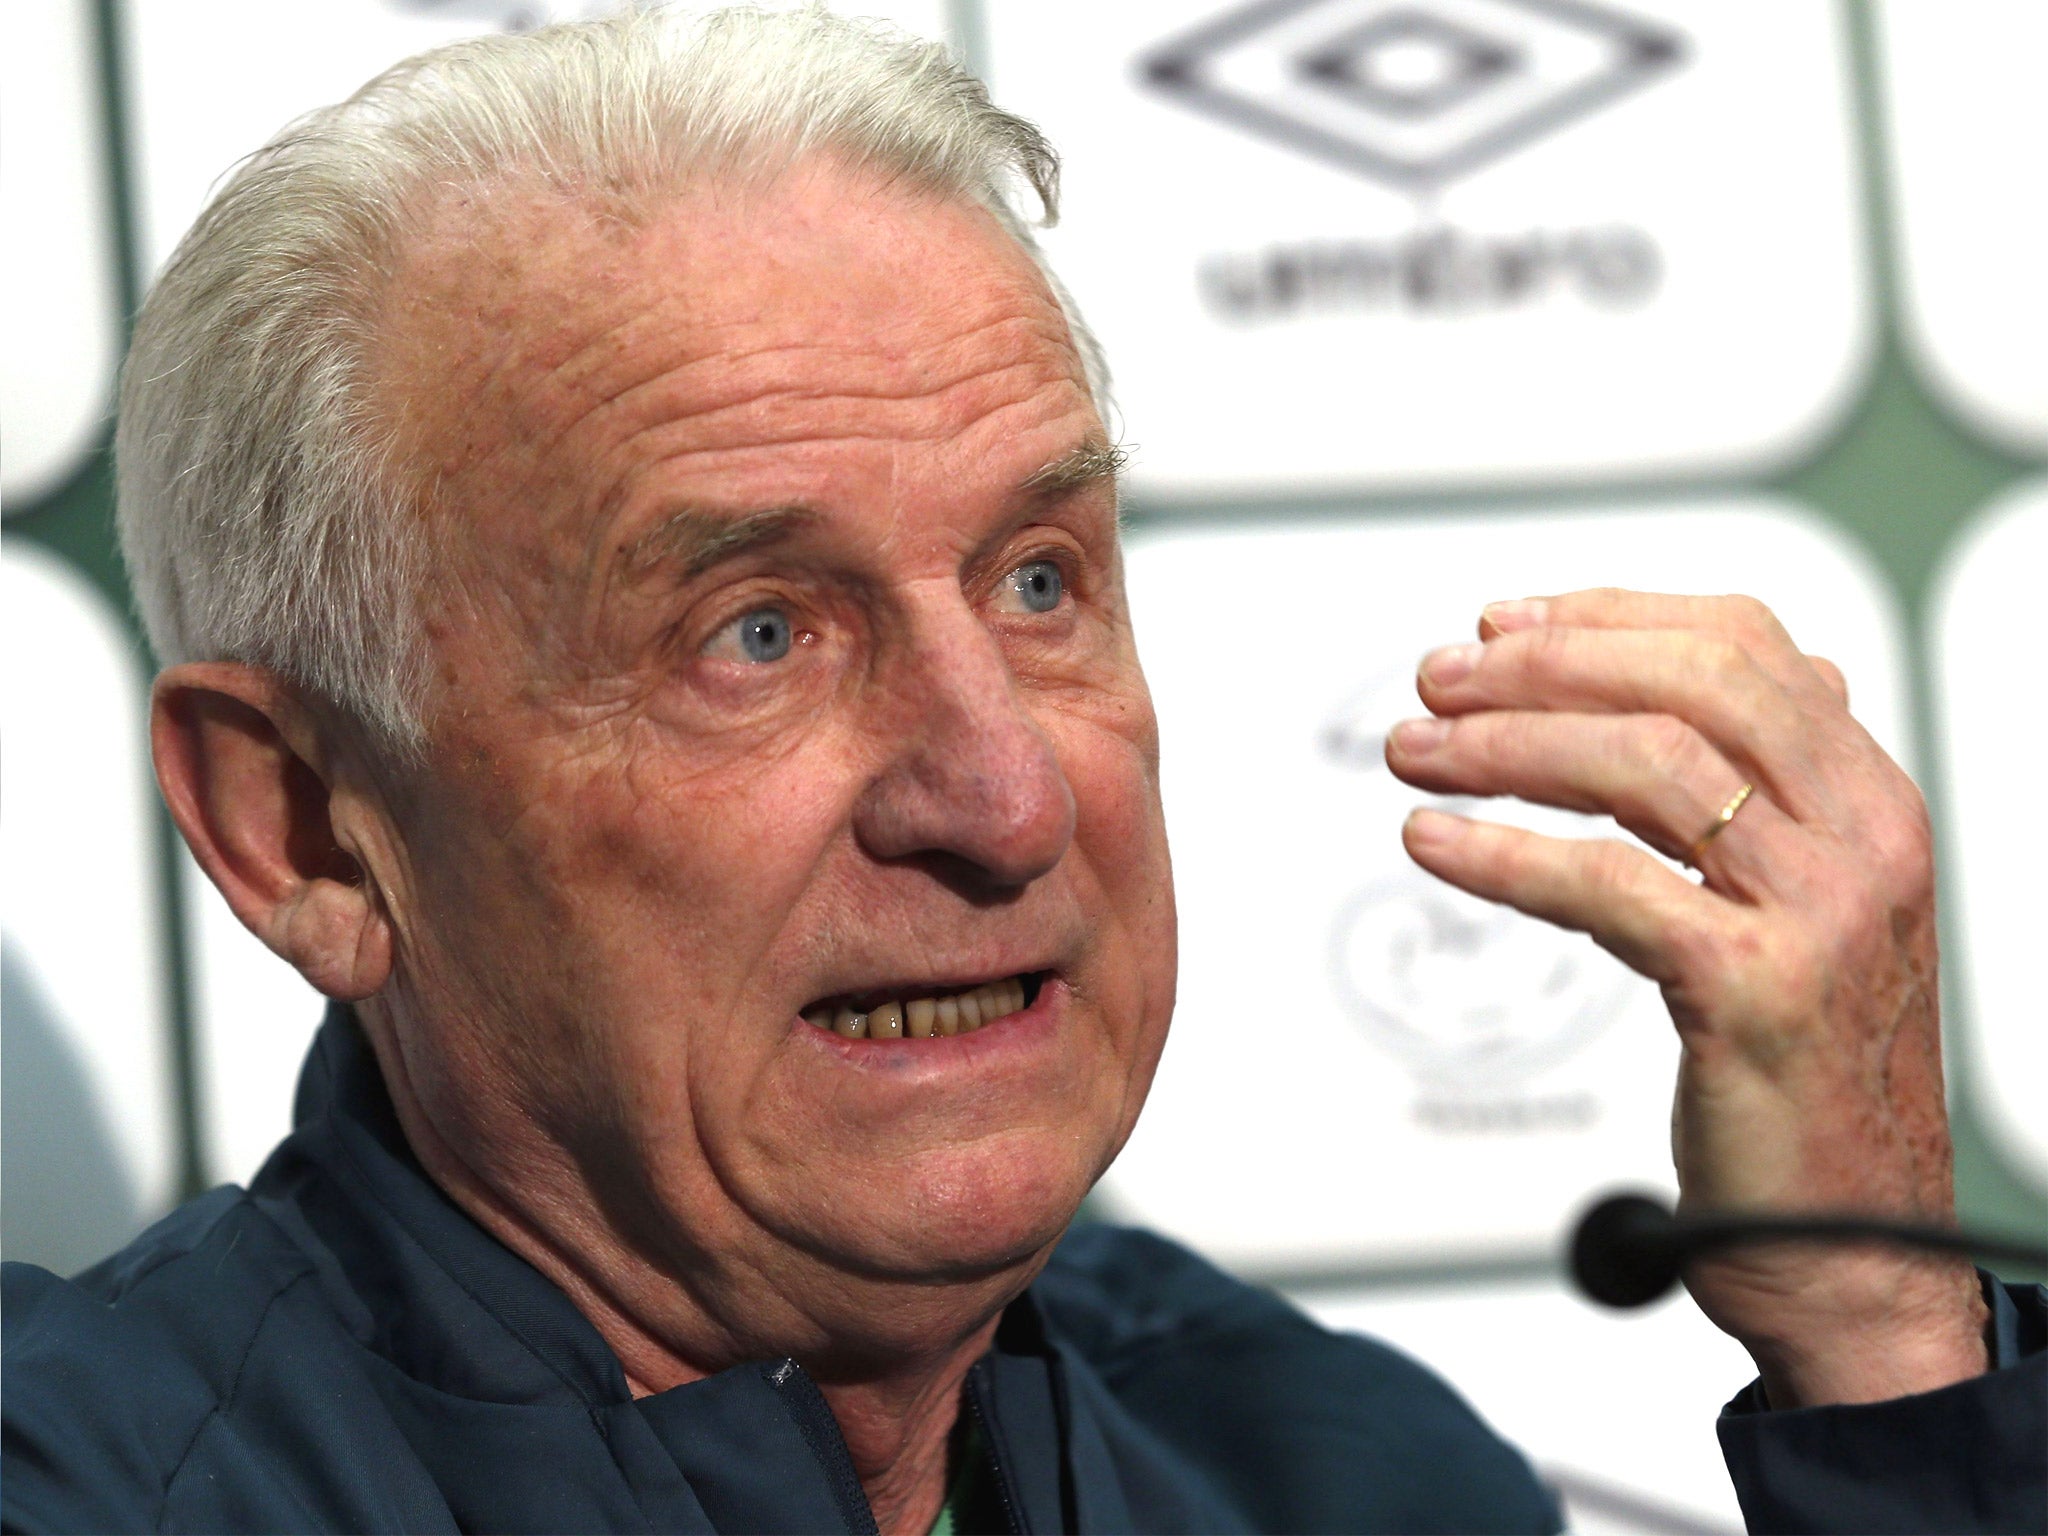 Giovanni Trapattoni helped Milan to their first European Cup success at Wembley in 1963